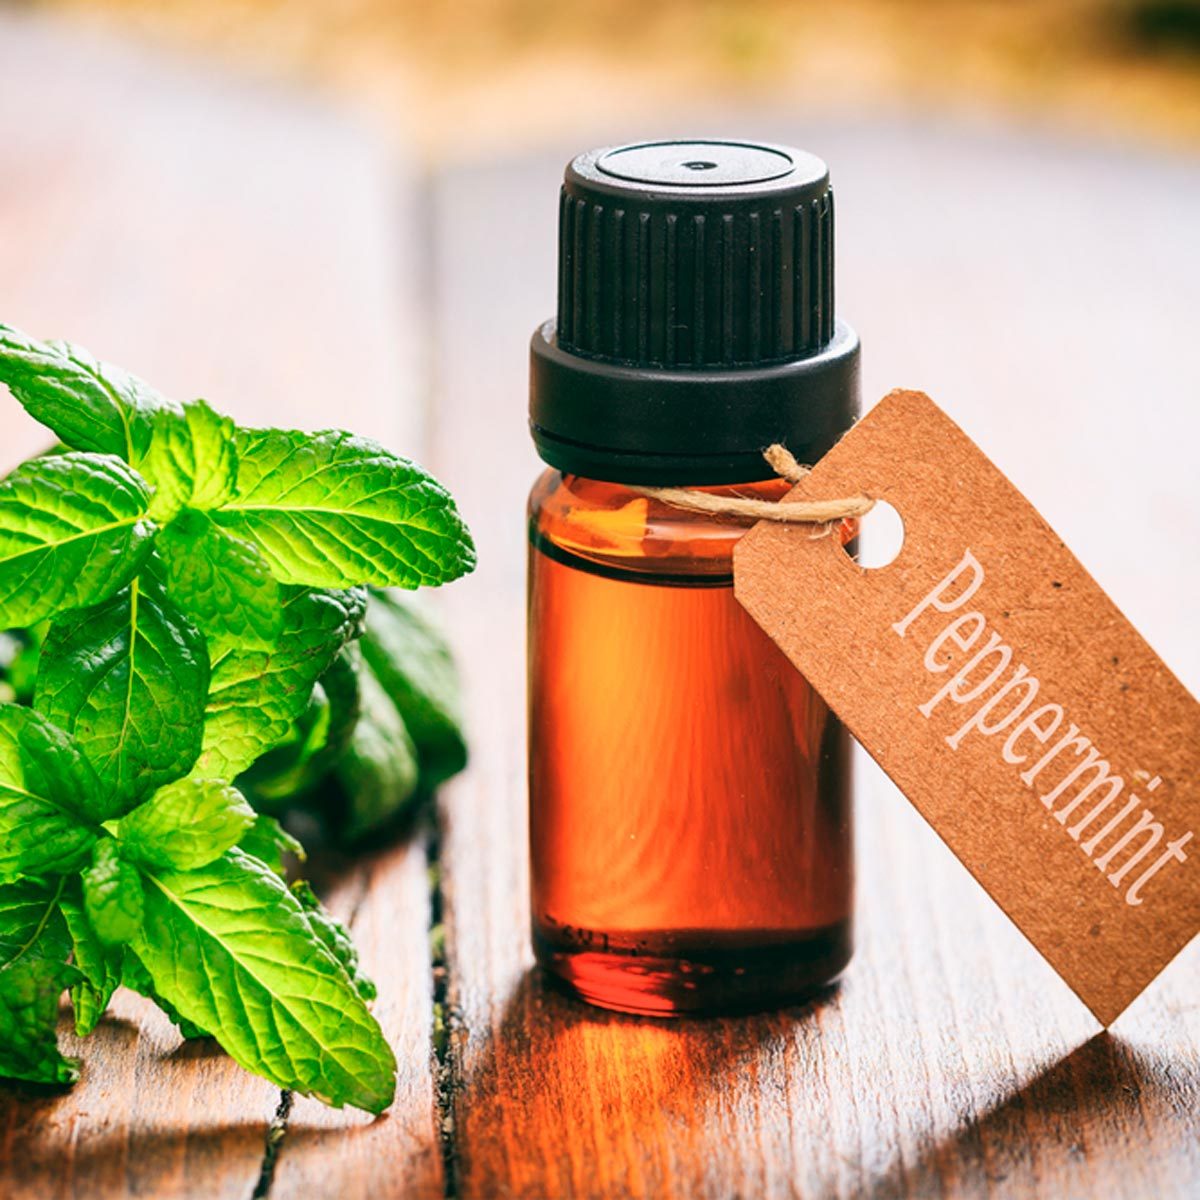 A Profile on Peppermint Oil: 5 Fresh Uses - Young Living